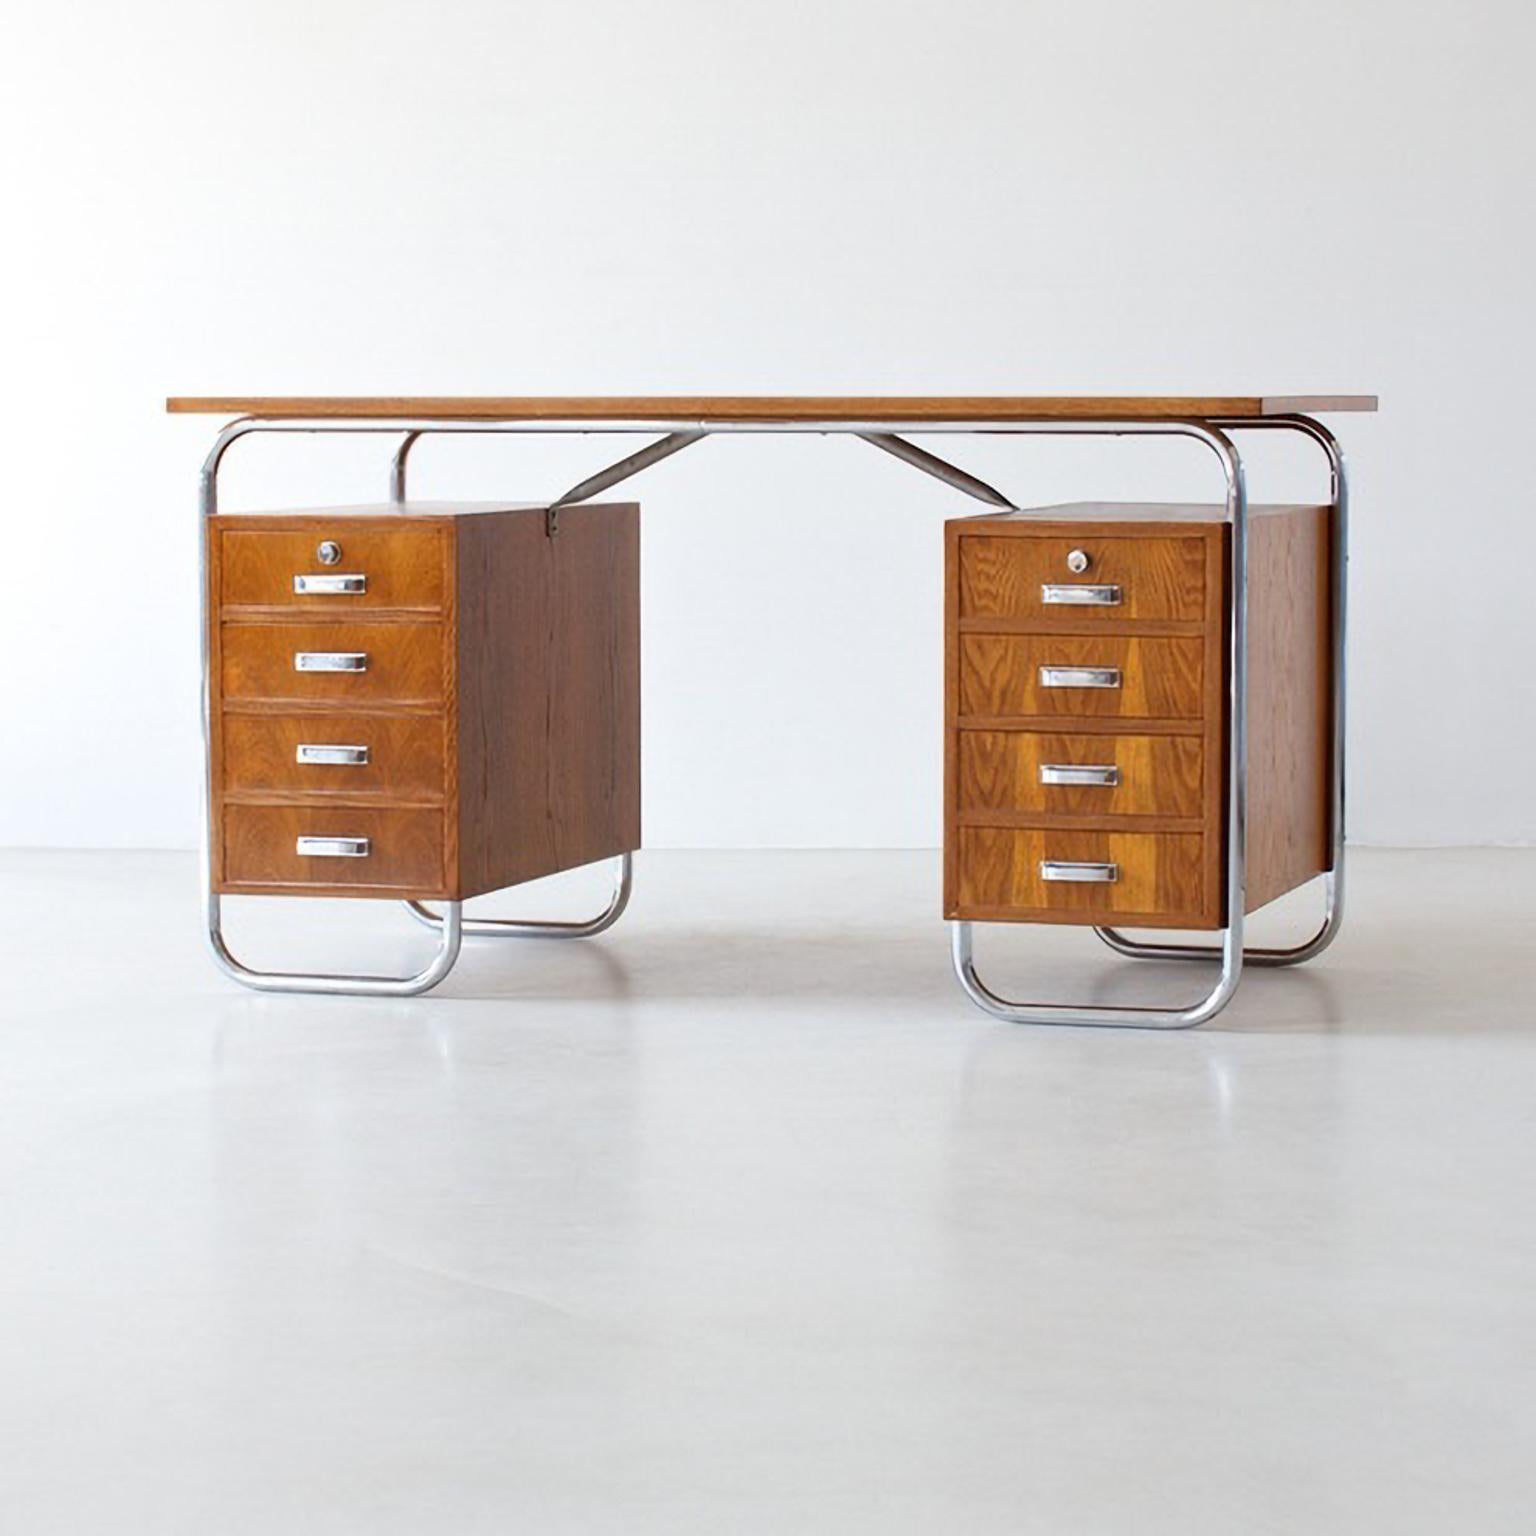 Modernist tubular steel desk with two chests of drawers, chrome plated metal, oak veneer, circa. 1935.